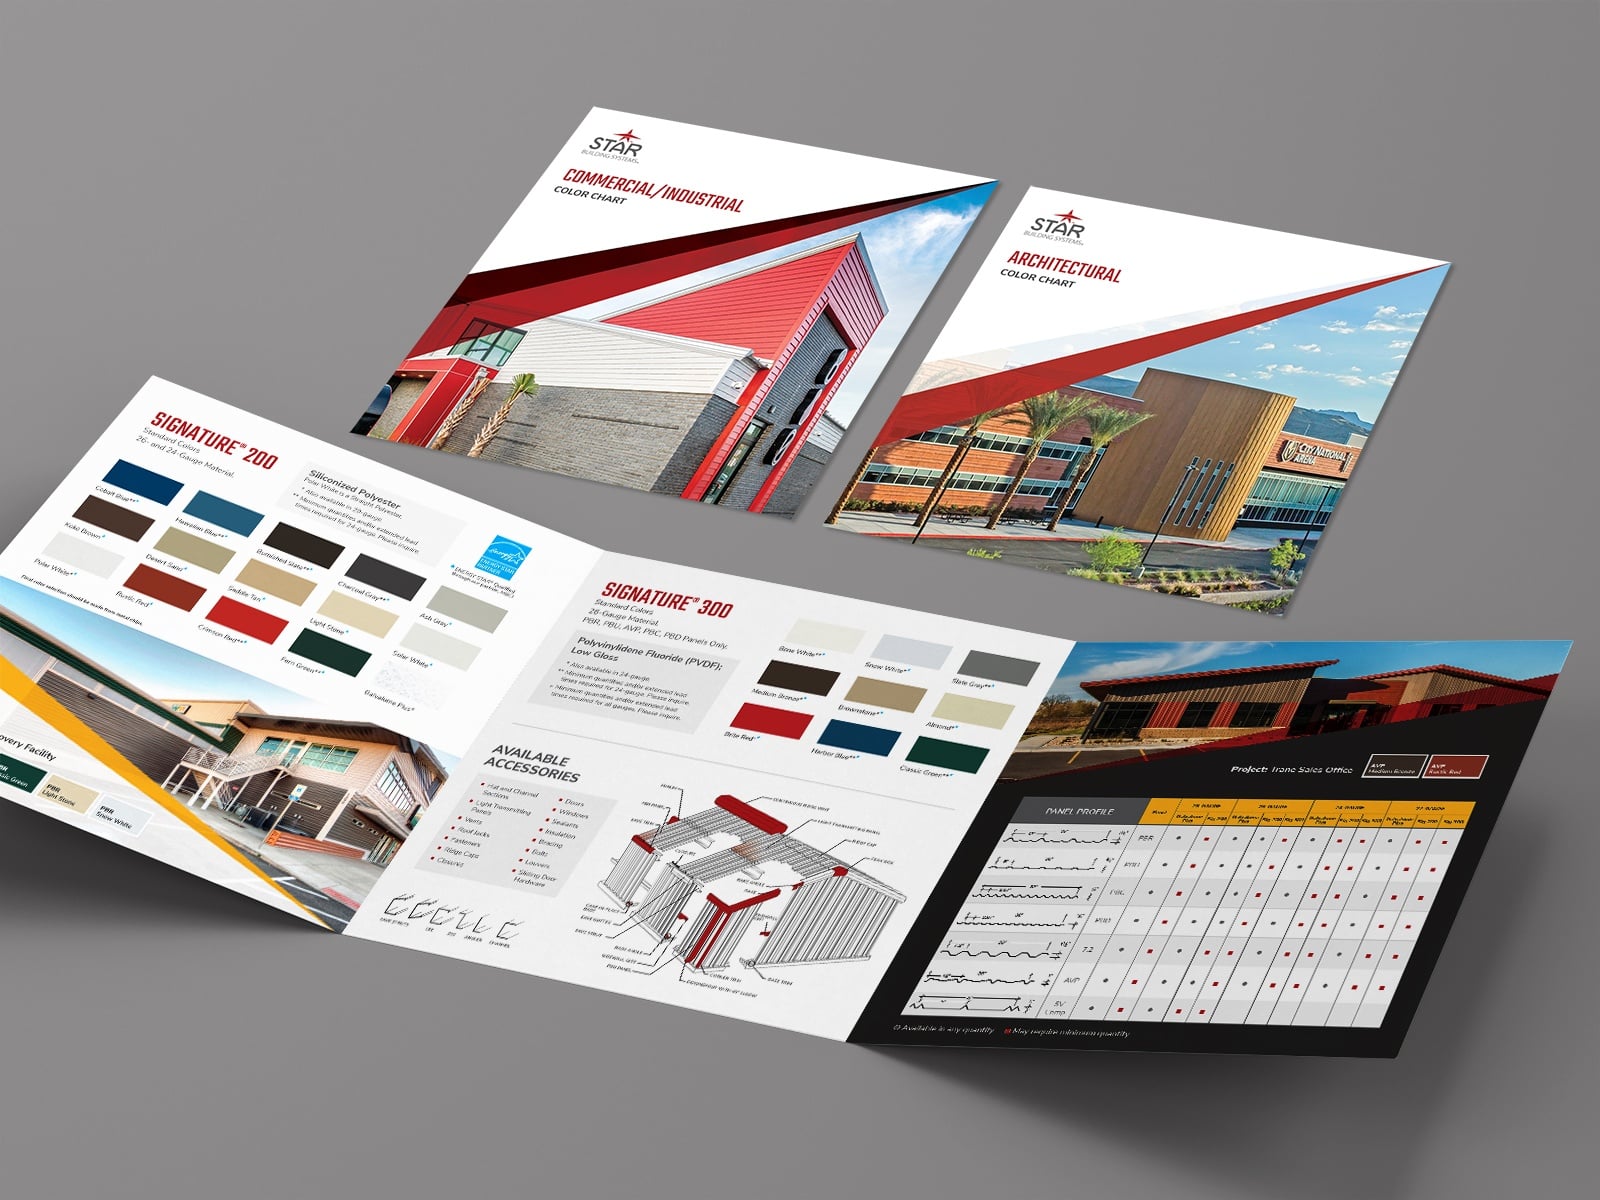 Star Building Systems company brochure highlighting the visual brand system